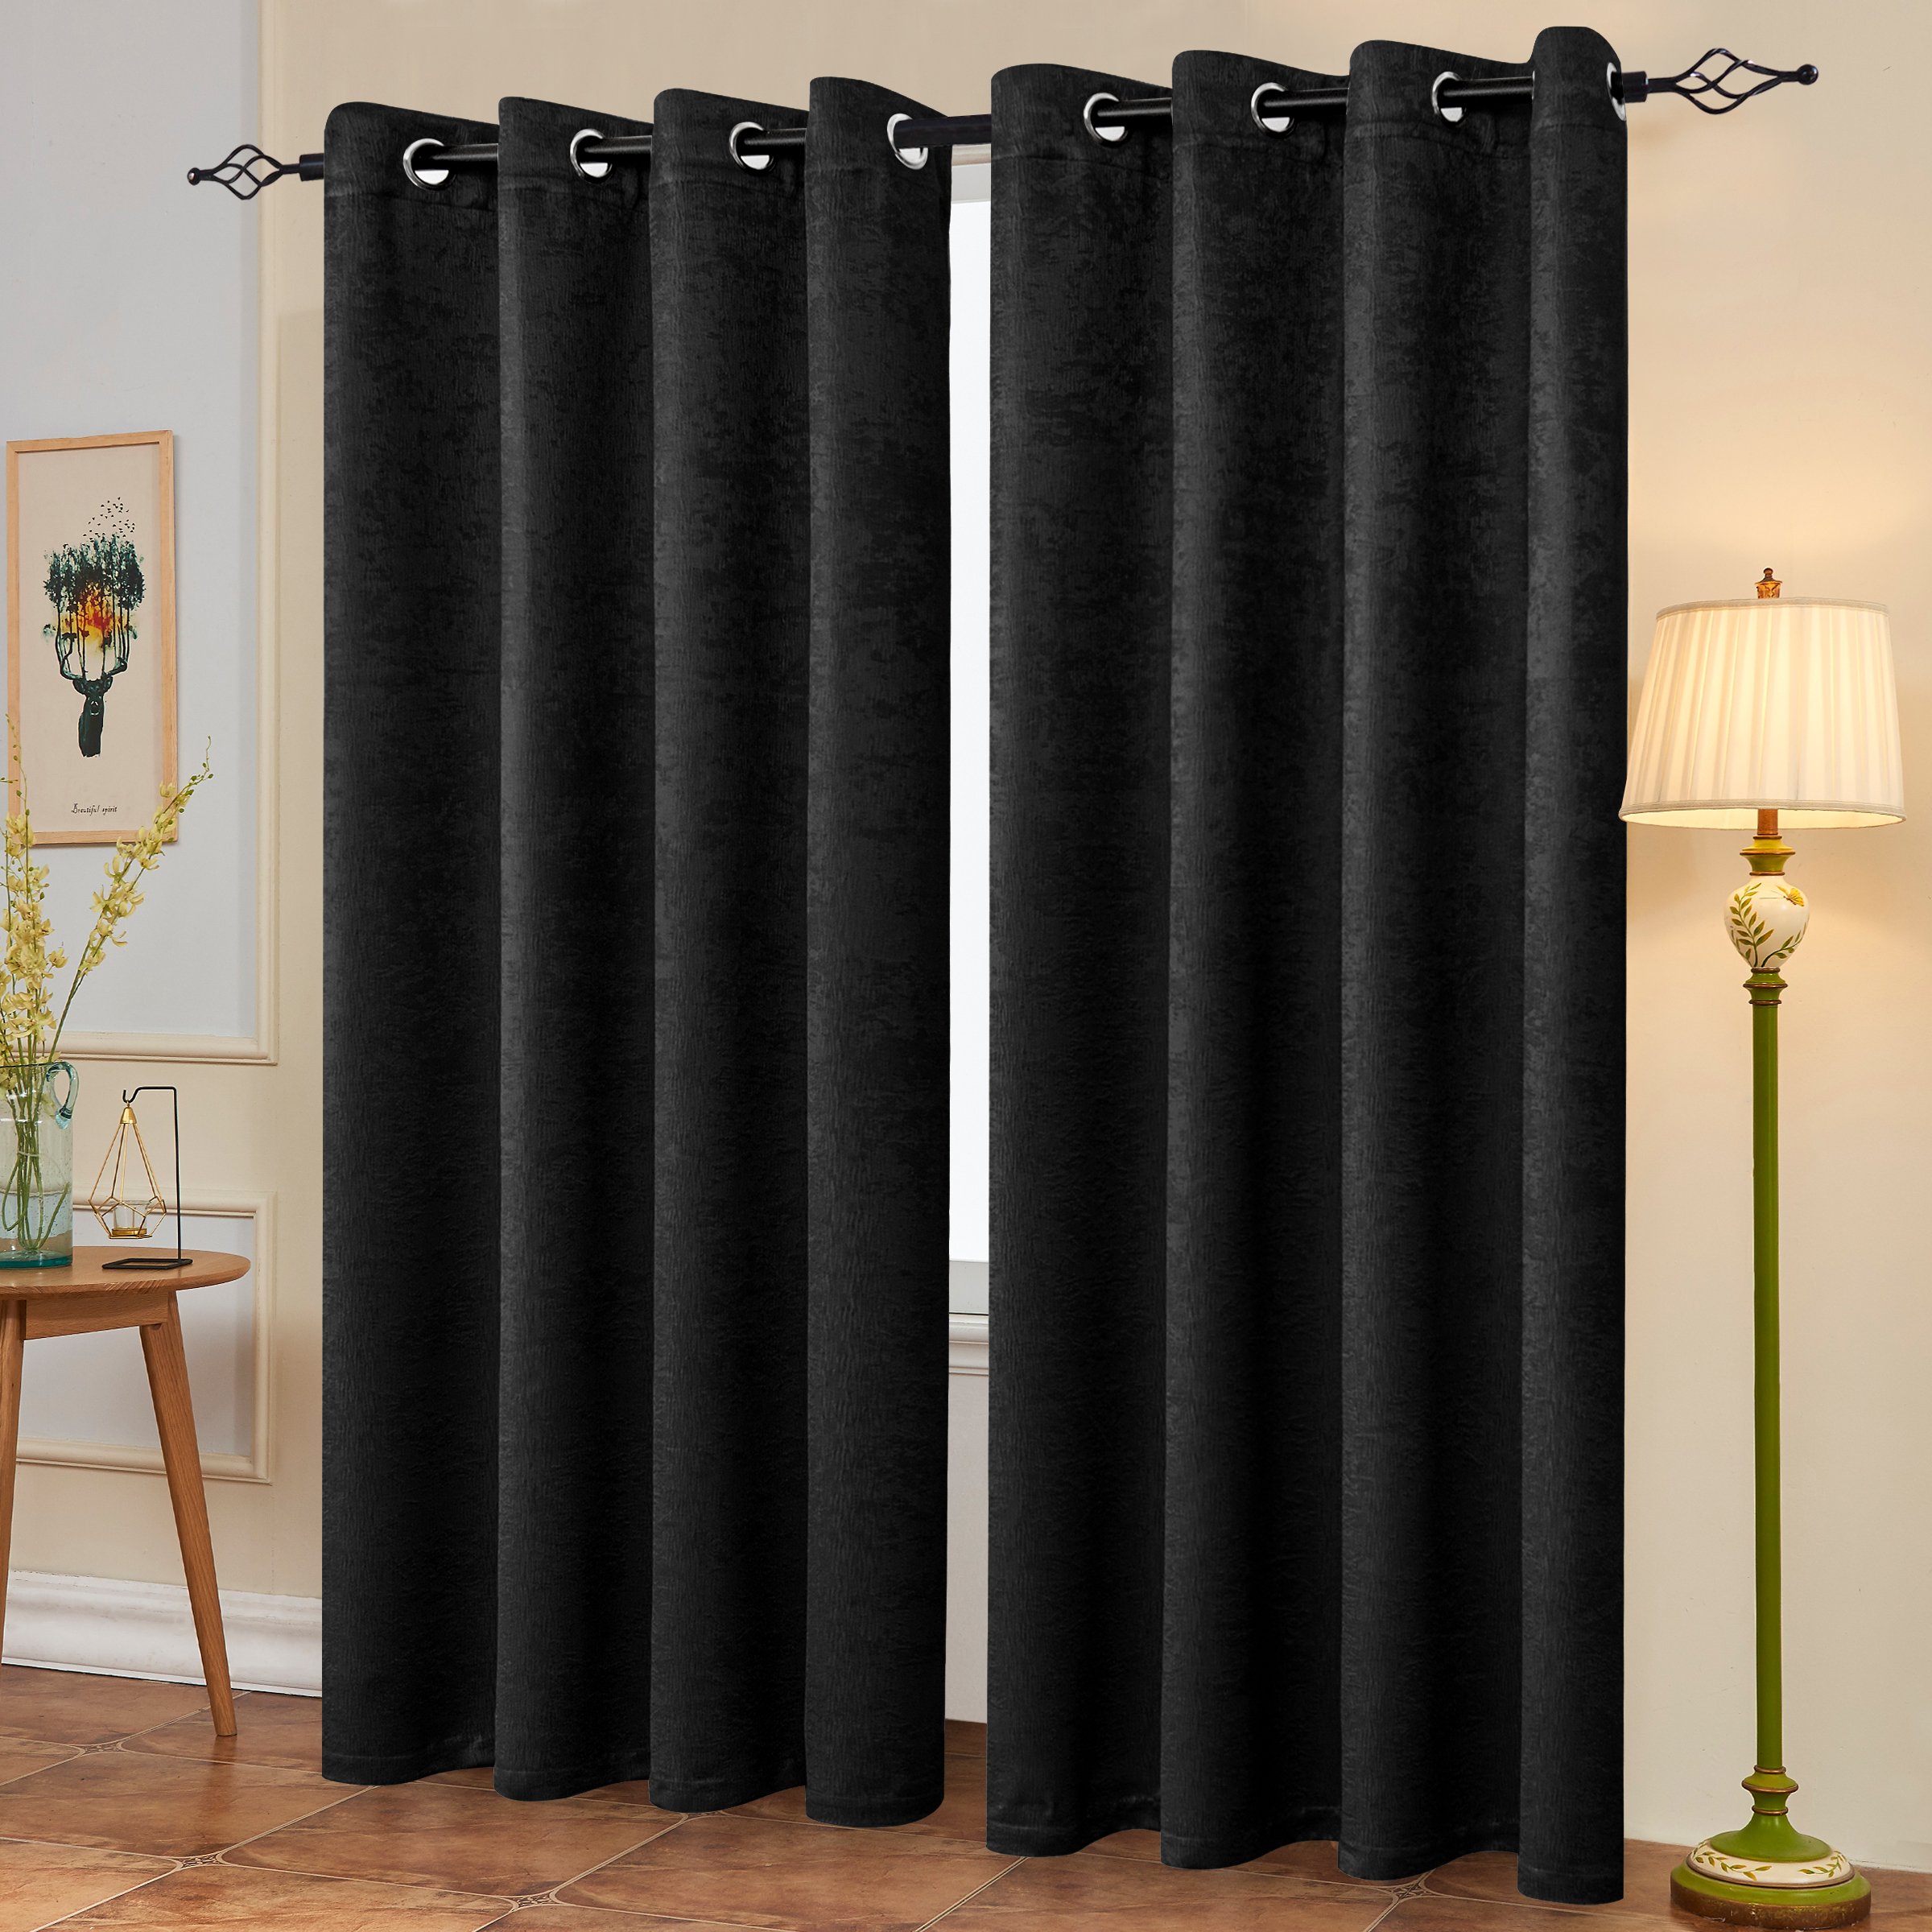 Subrtex Thermal Insulated Grommet Blackout Curtains for Bedroom, Set of 2 Panels, 53"×84", Black - image 5 of 5